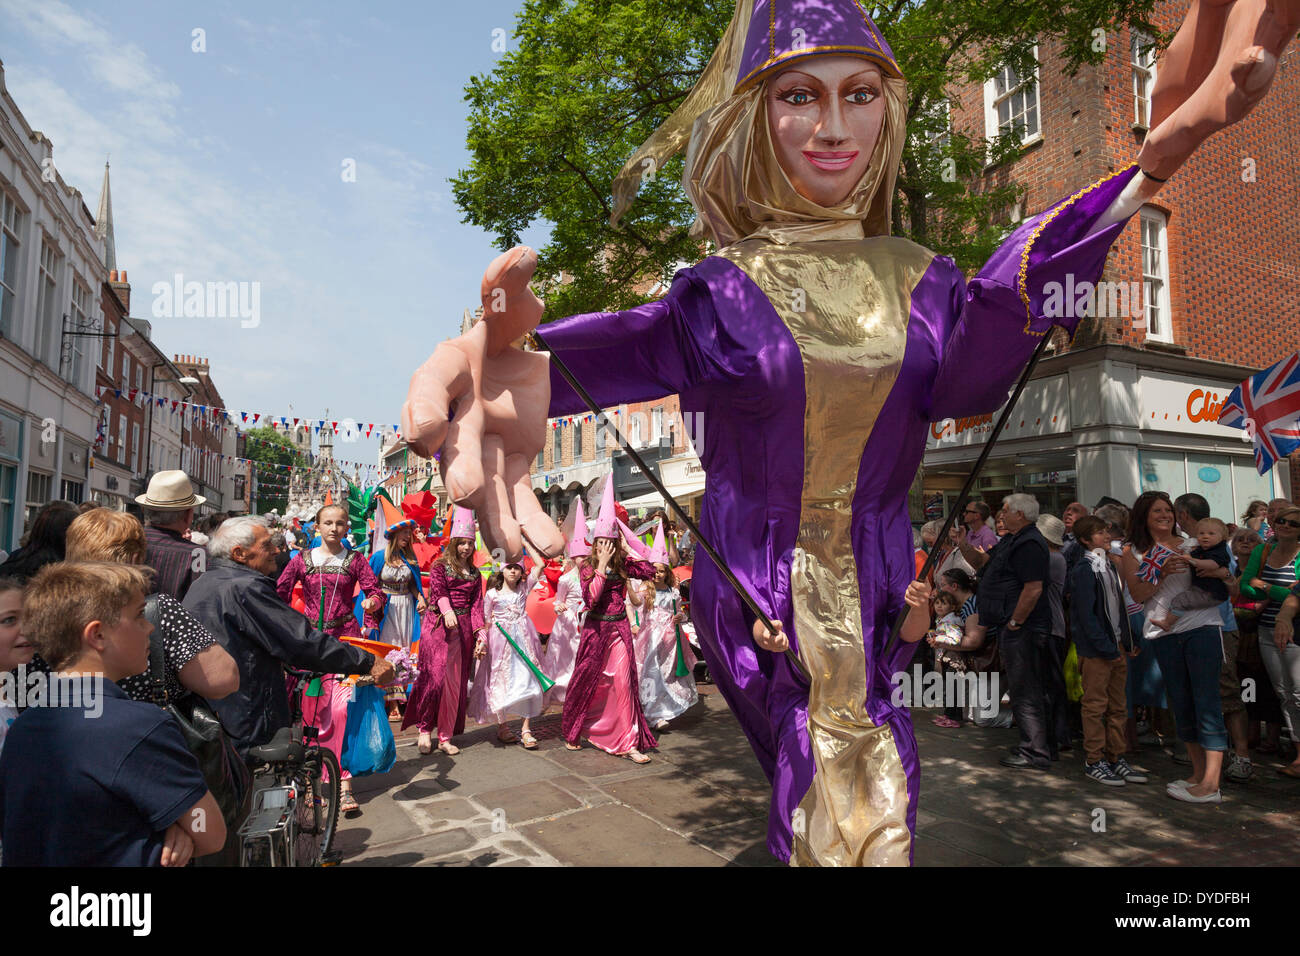 Giant carnival character of medieval lady in parade at Chichester city centre to celebrate the Queen's Diamond Jubilee. Stock Photo